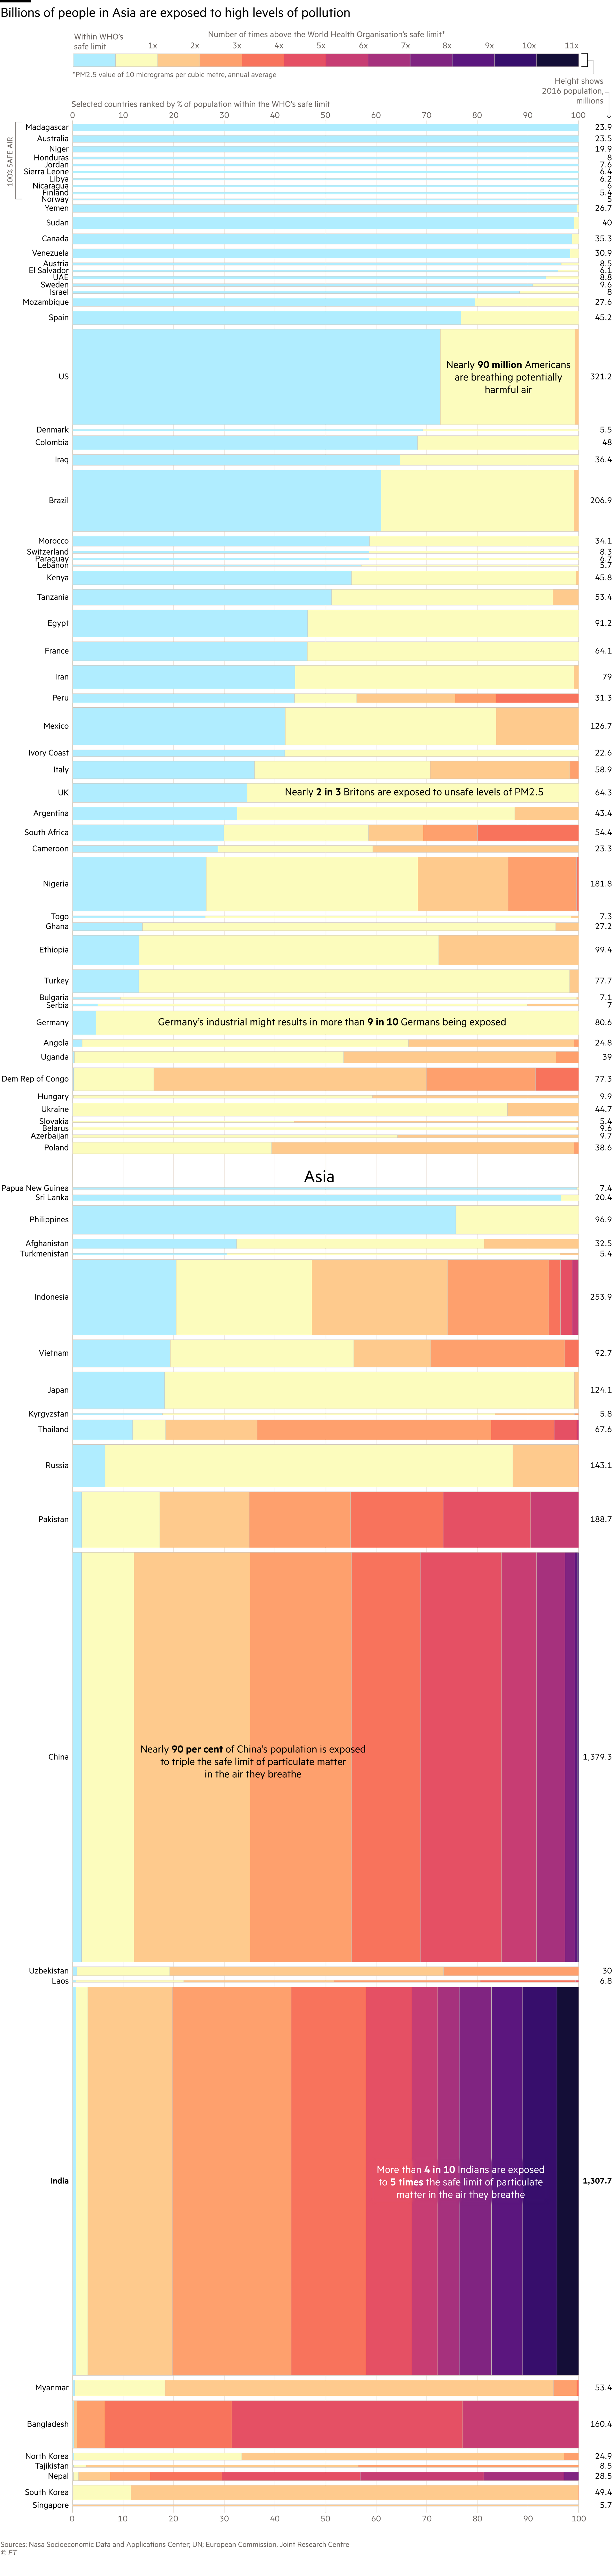 Marimekko chart showing population of selected countries affected by PM2.5 pollution. India is worst-affected with 99.3% of its population breathing air over the safe limit set by the World Health Organisation